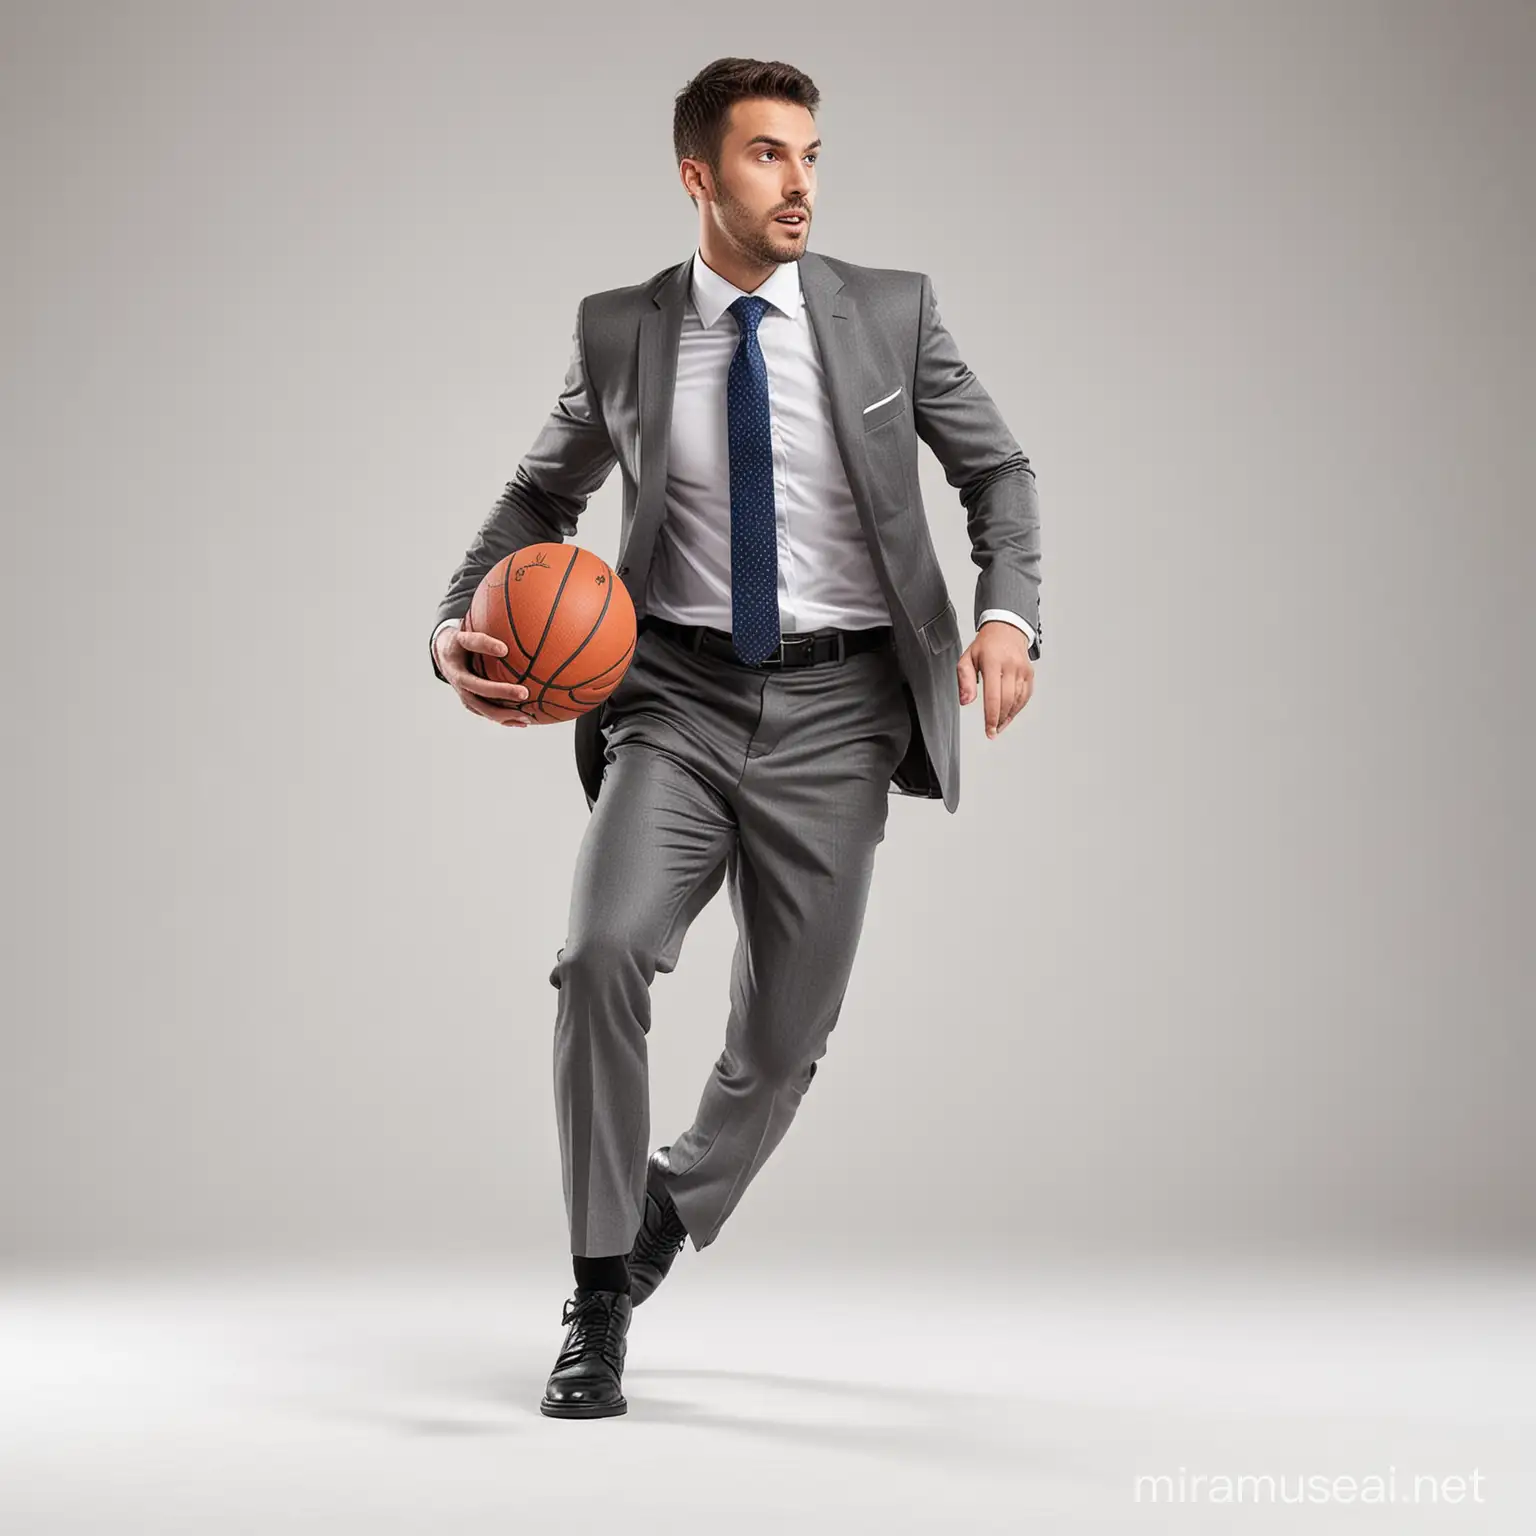 Businessman Engaged in Basketball Action on White Background